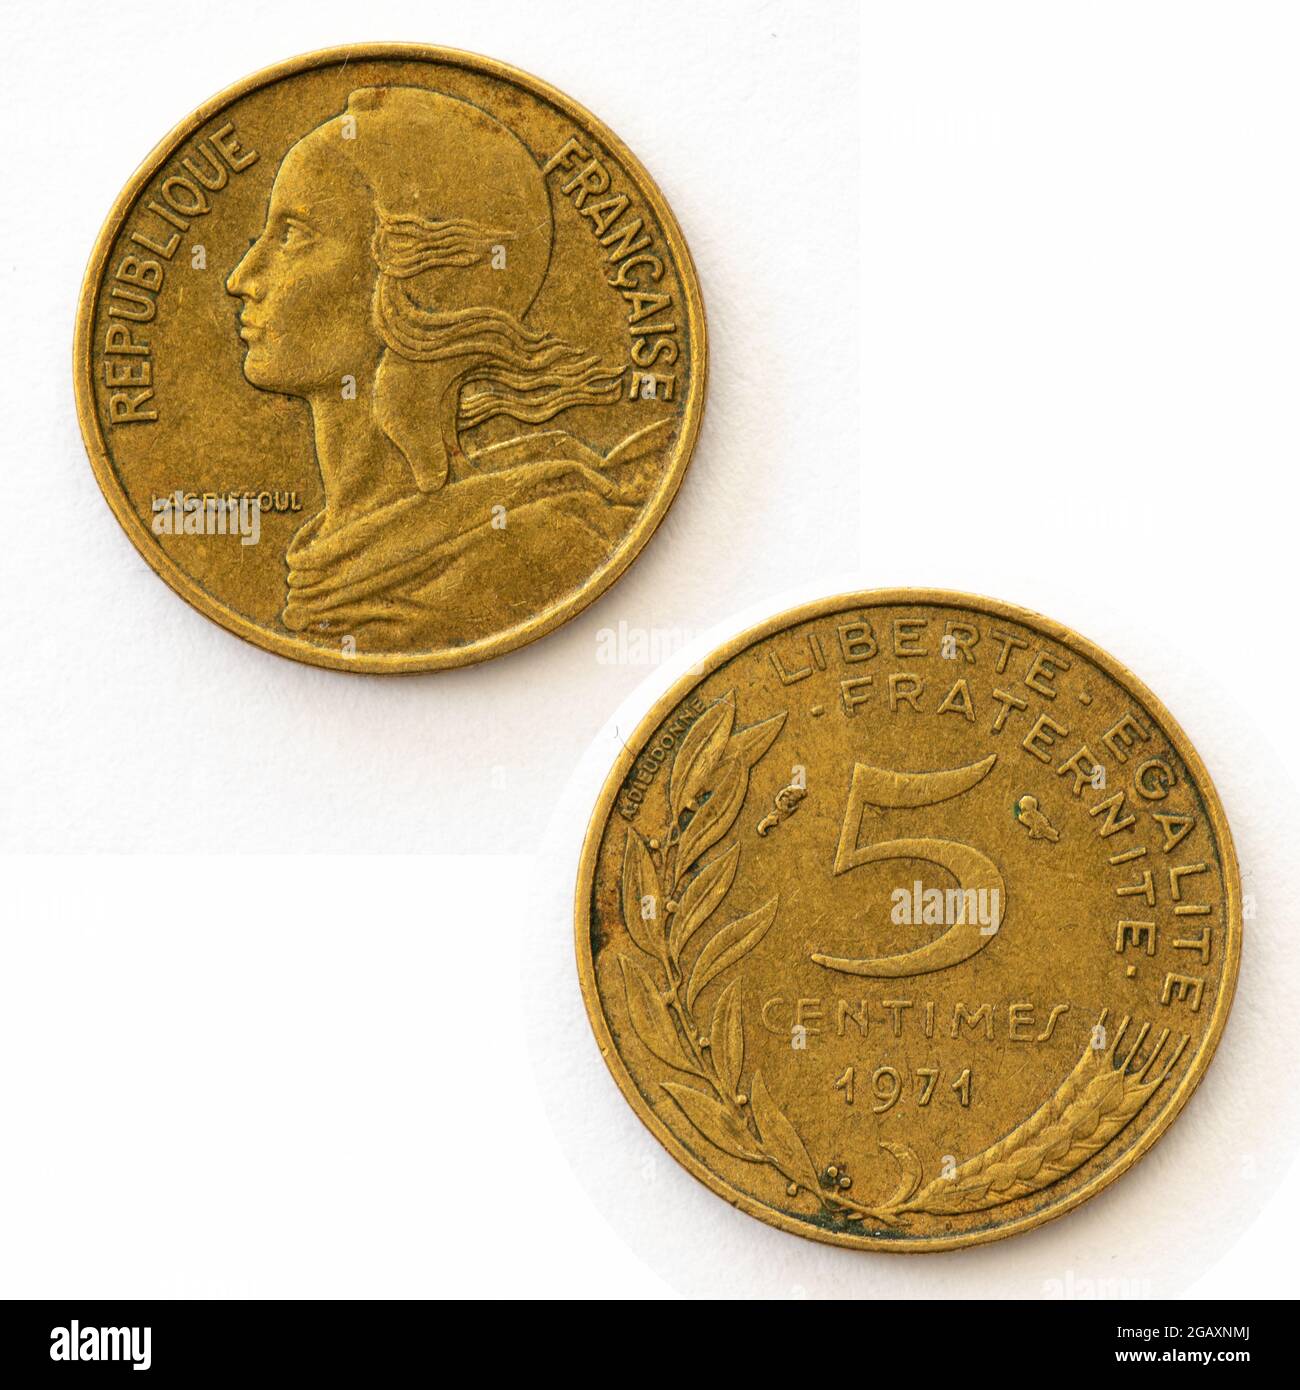 French 5 centime coin - 1971 - designed by Henri Lagriffoul featuring Marianne - four fold variant Stock Photo